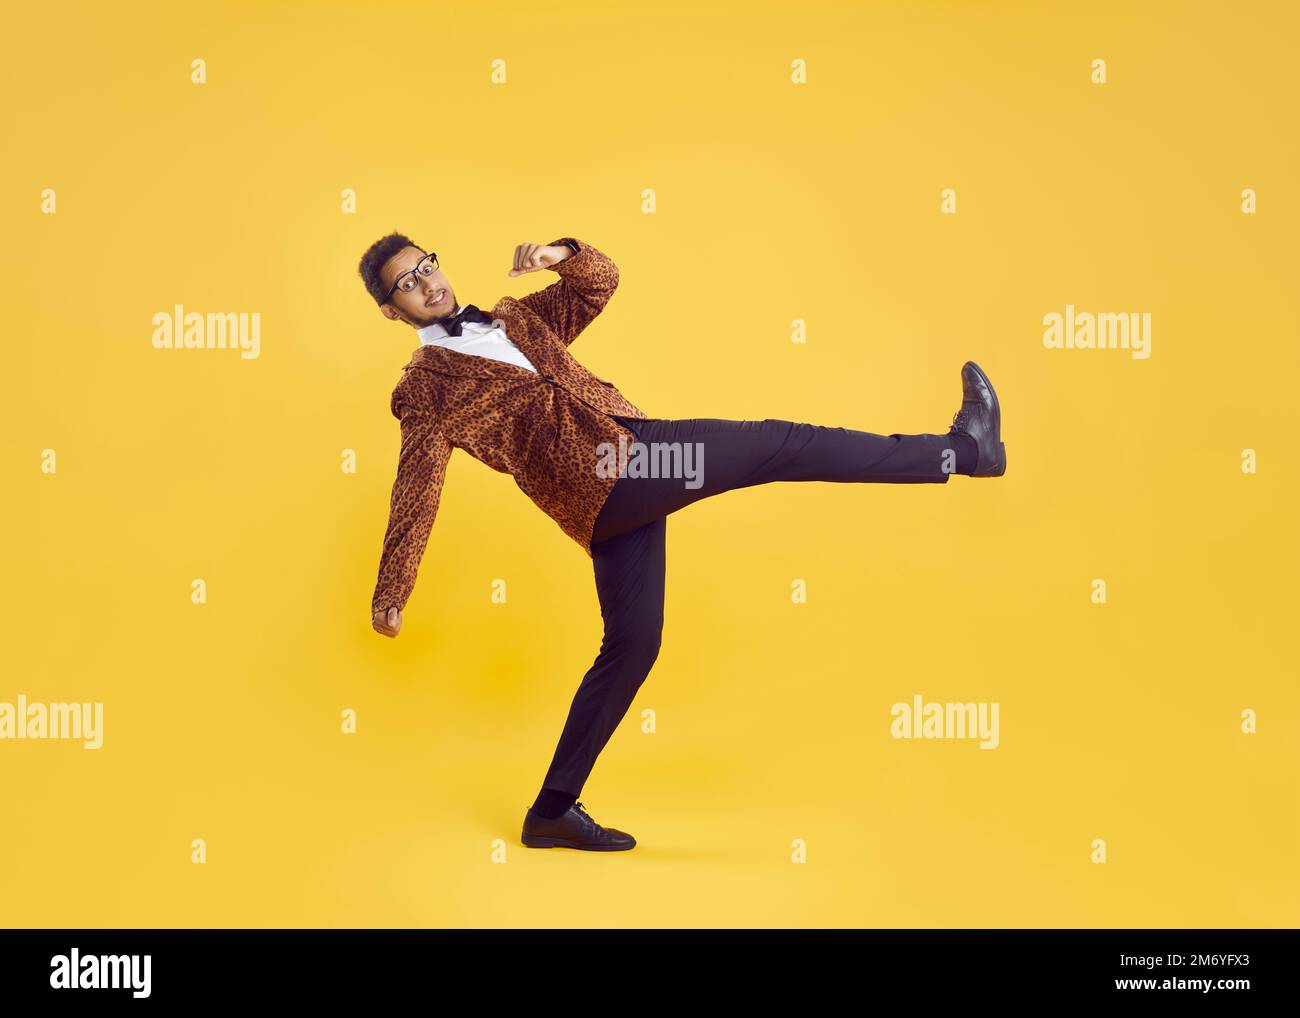 Cheerful eccentric and funny young dark-skinned man in leopard jacket isolated on yellow background. Stock Photo